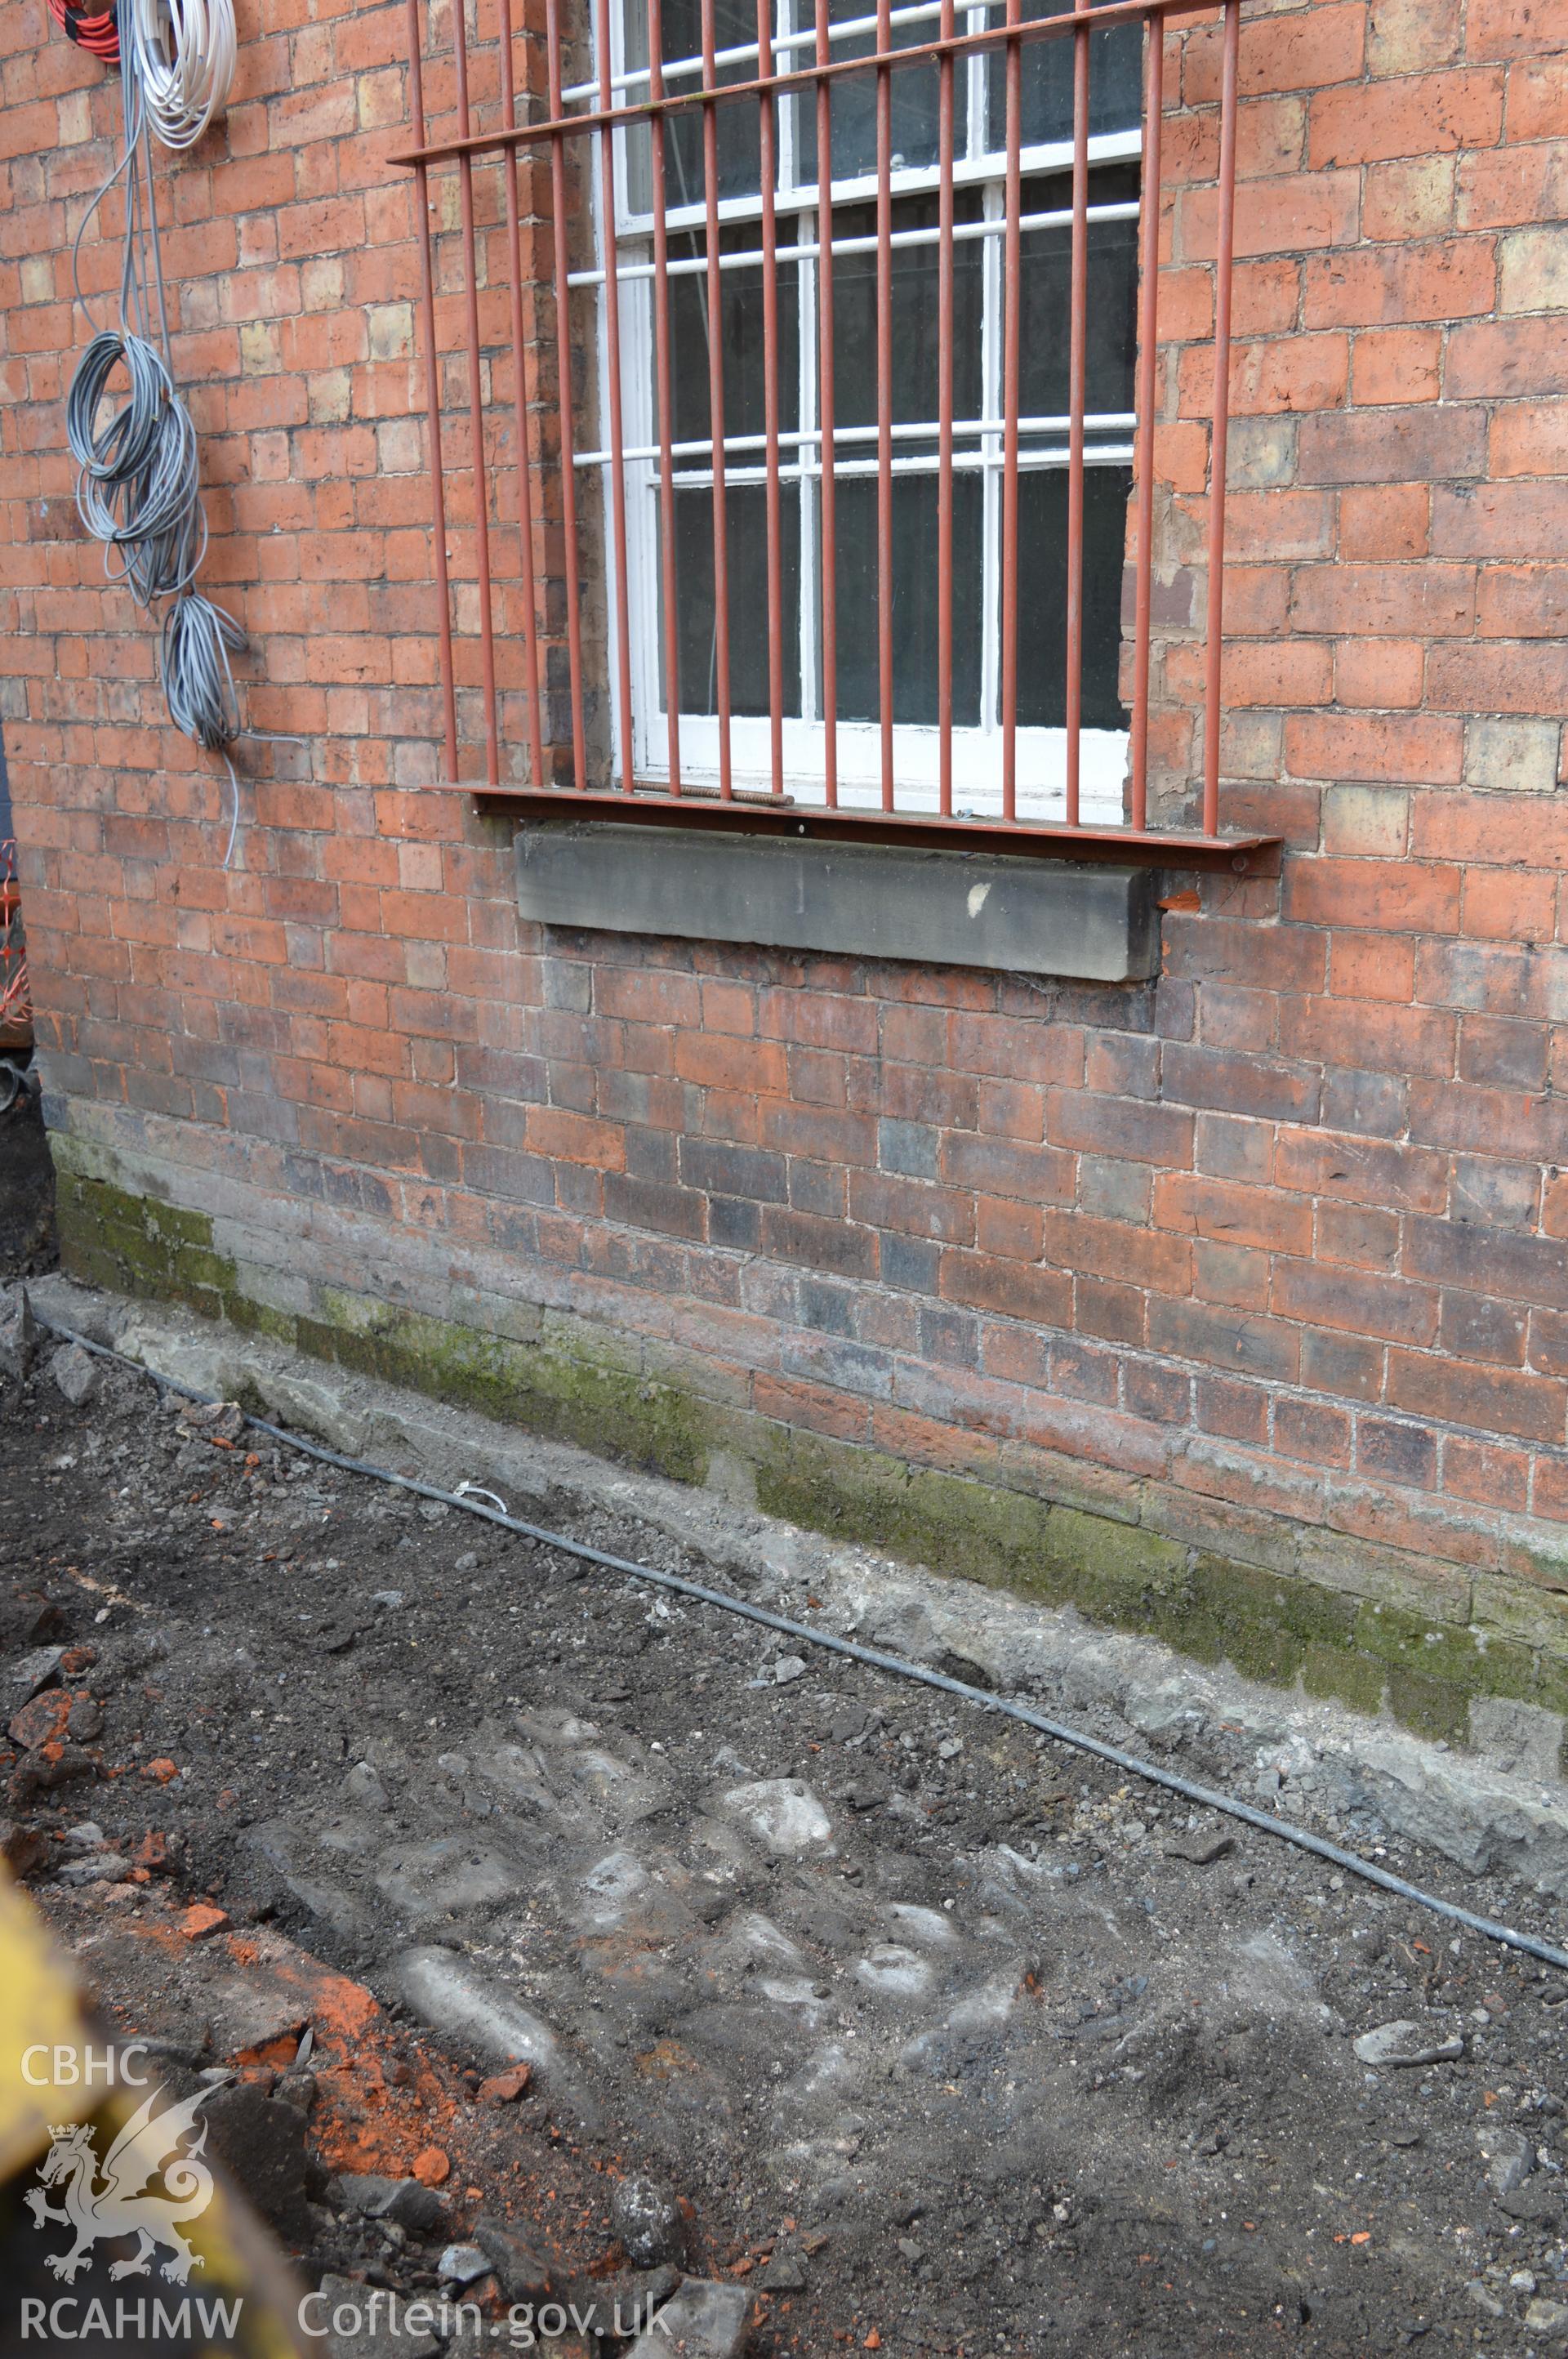 Digital colour photograph showing view from the north showing cobbled surface. Photographed as part of CPAT Project 2351: 2 Severn Street, Welshpool, Powys - Archaeological Watching Brief, 2019. Report no. 1663.